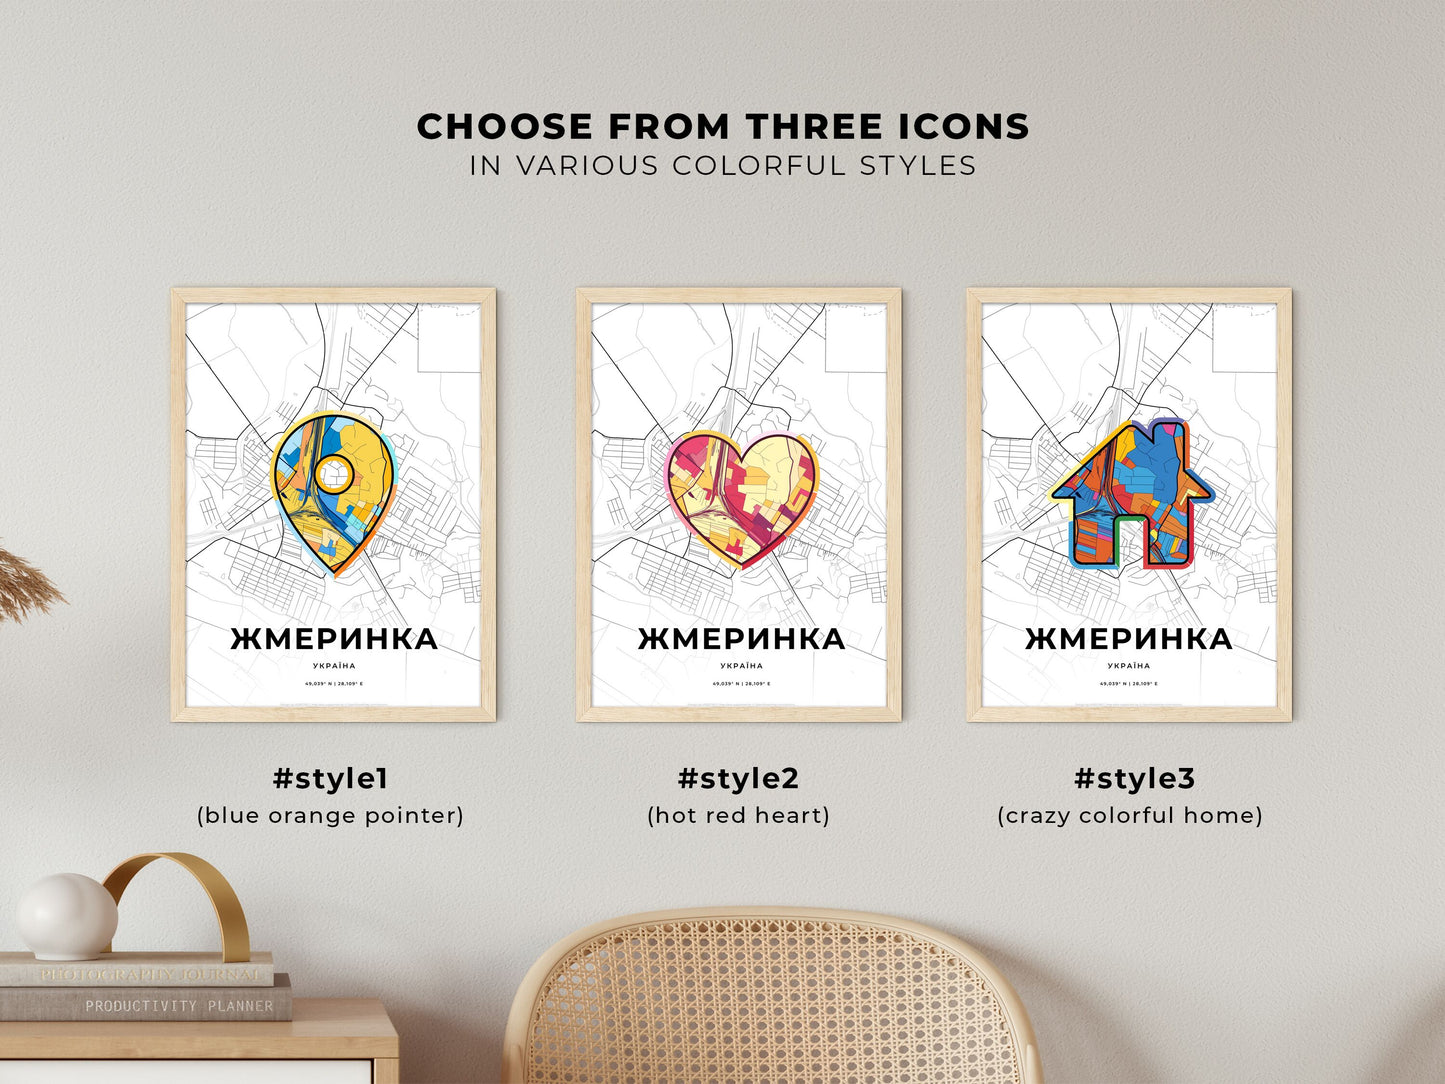 ZHMERYNKA UKRAINE minimal art map with a colorful icon. Where it all began, Couple map gift.